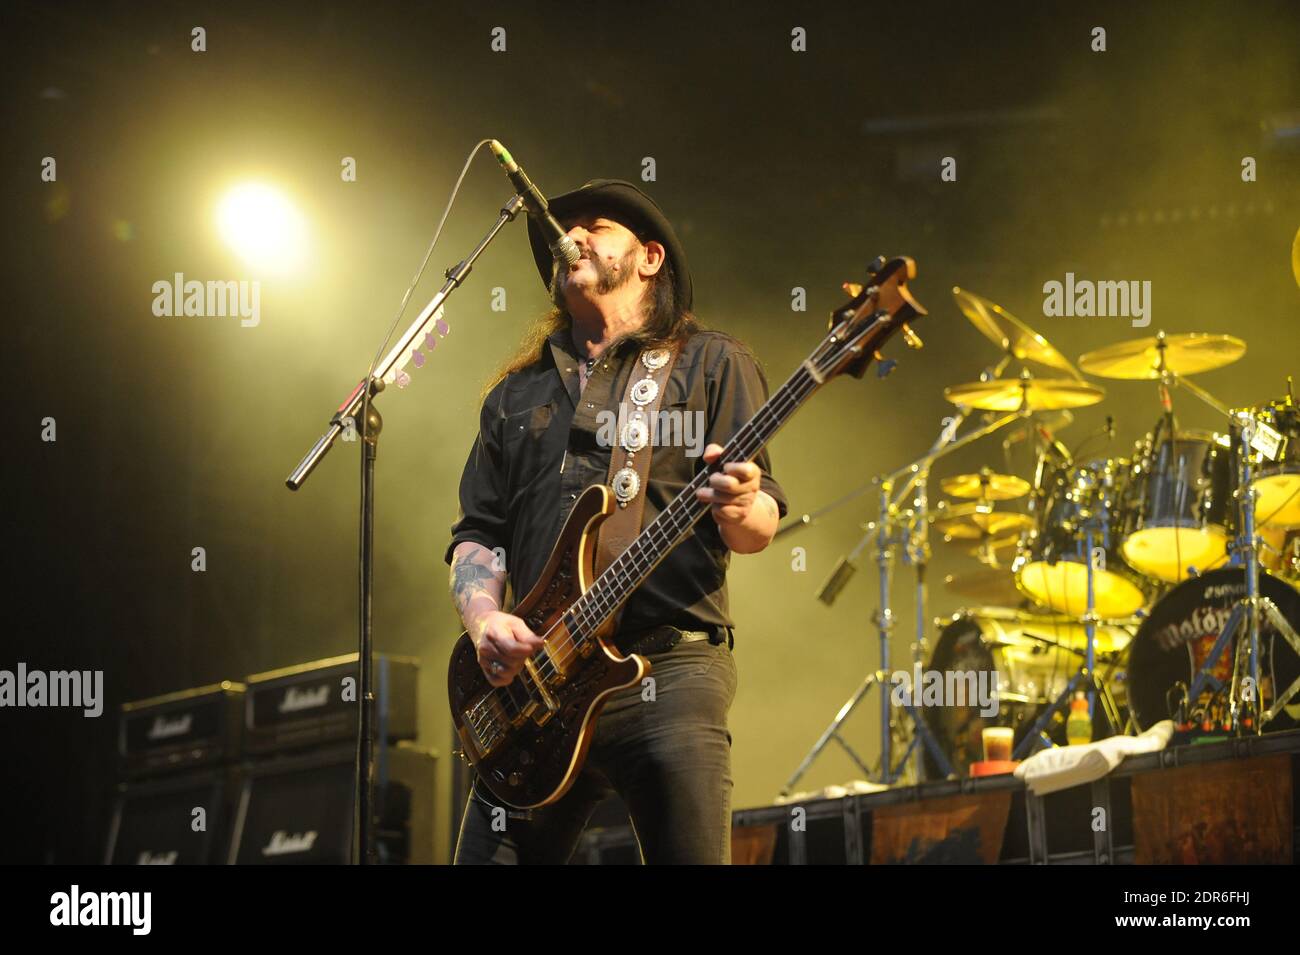 File Photo : Motorhead during the Paleo Festival in Nyon, Switzerland on  July 20, 2010. Motorhead frontman Lemmy has died aged 70, two days after  learning he had cancer, the British band